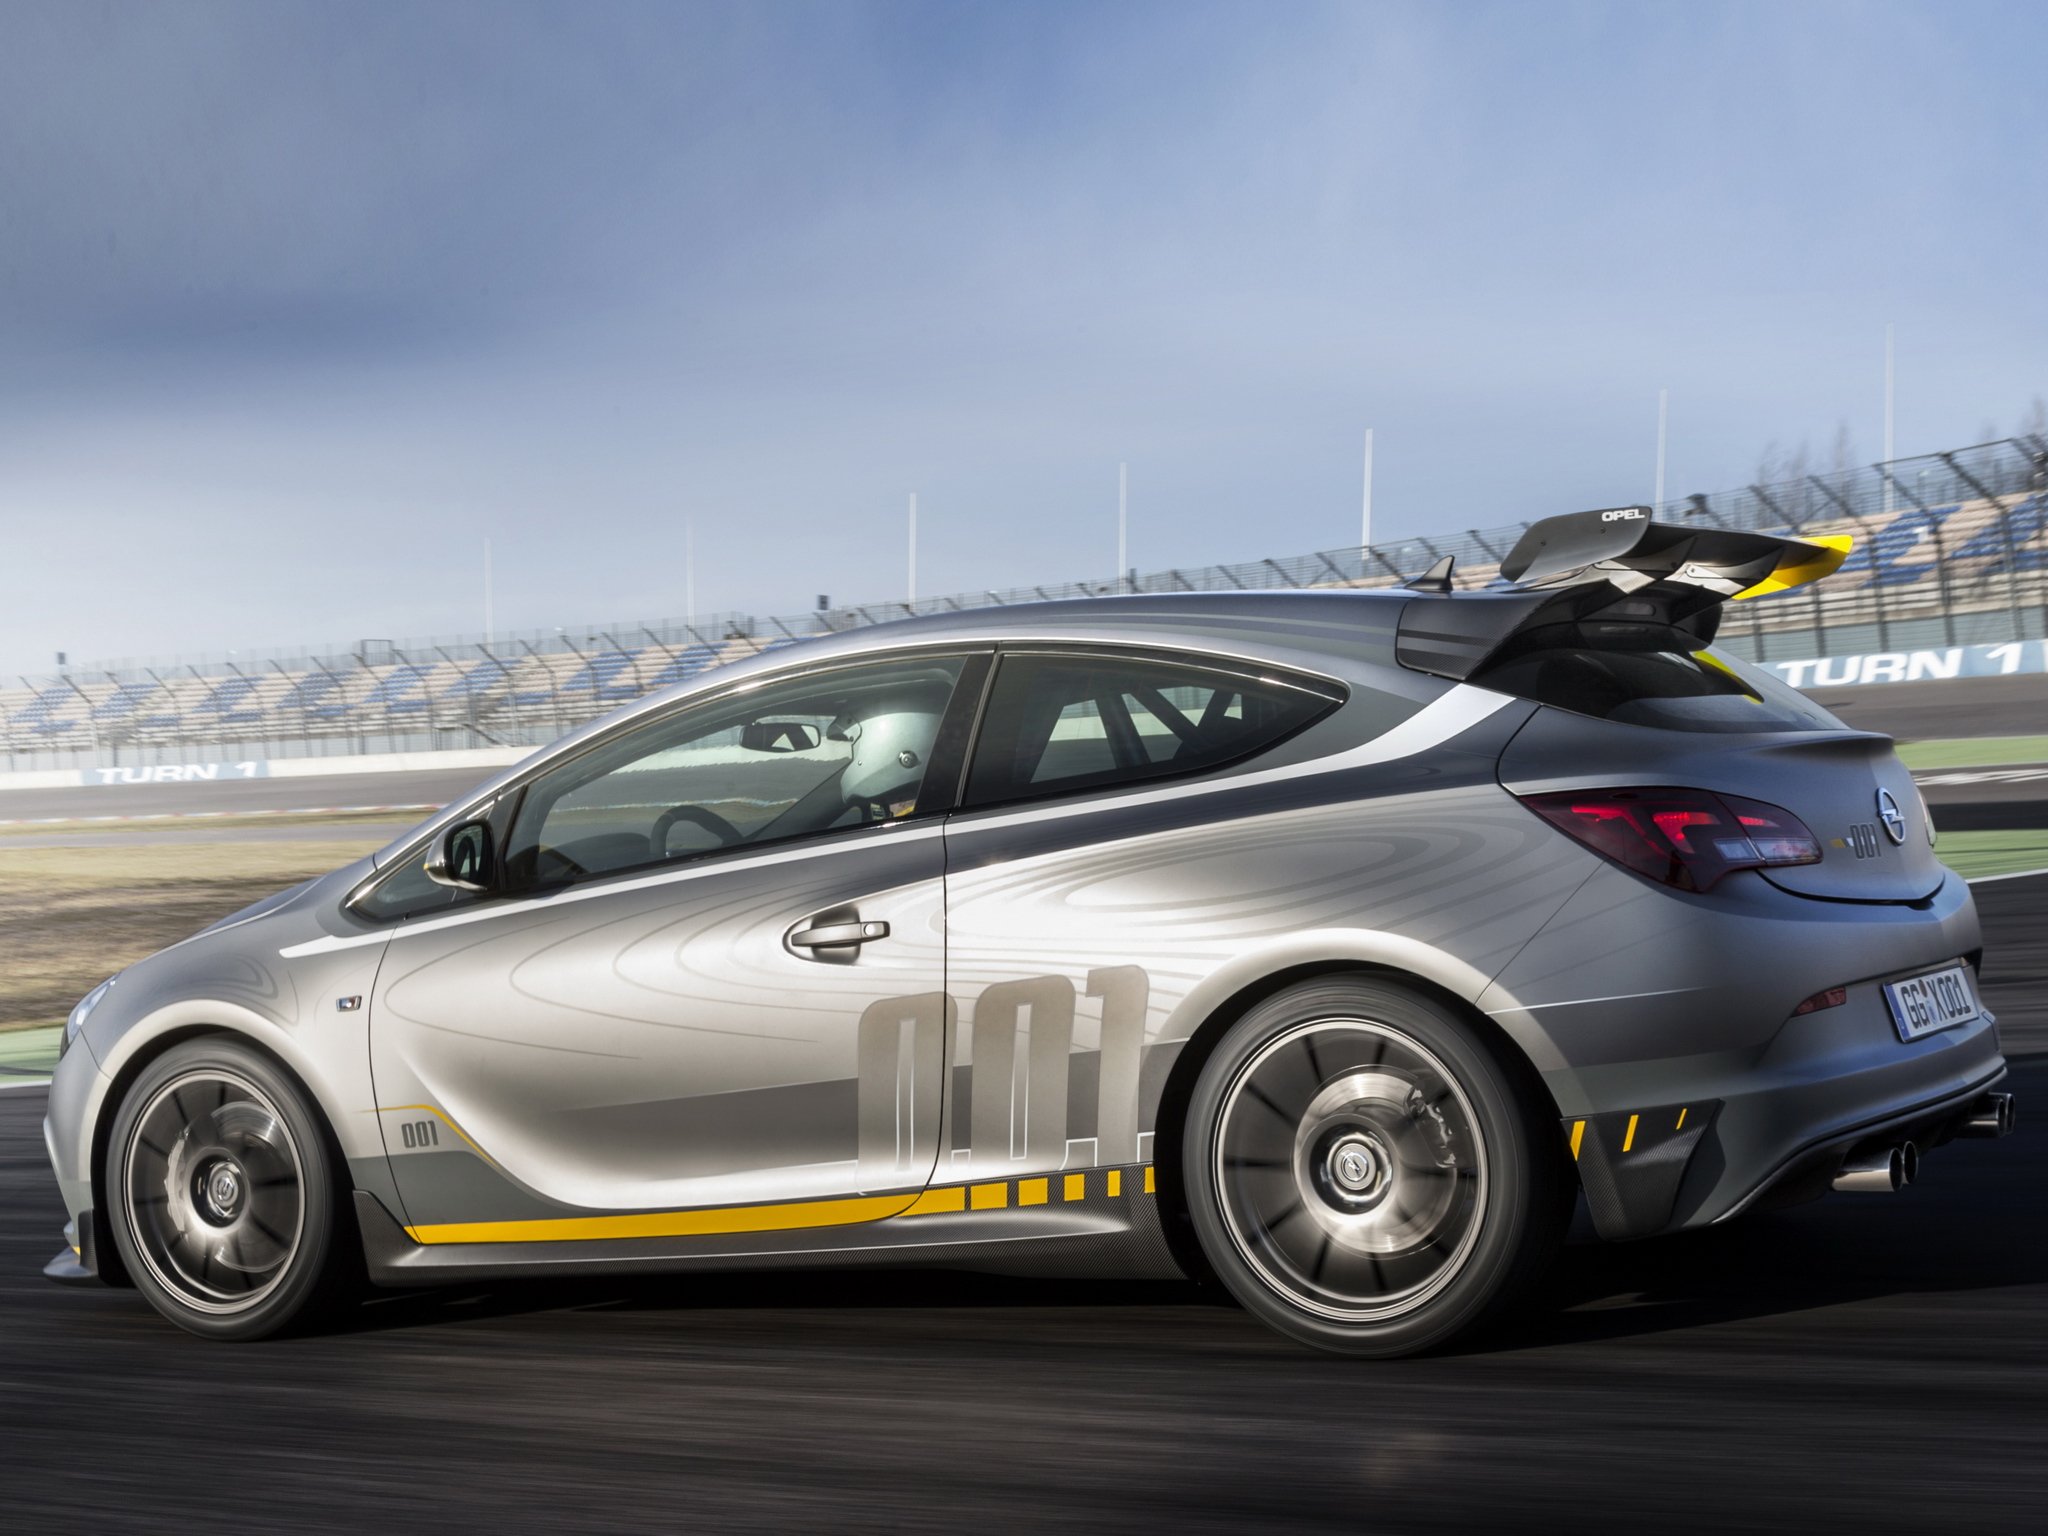 14 Opel Astra Opc Extreme Concept Wallpapers Hd Desktop And Mobile Backgrounds